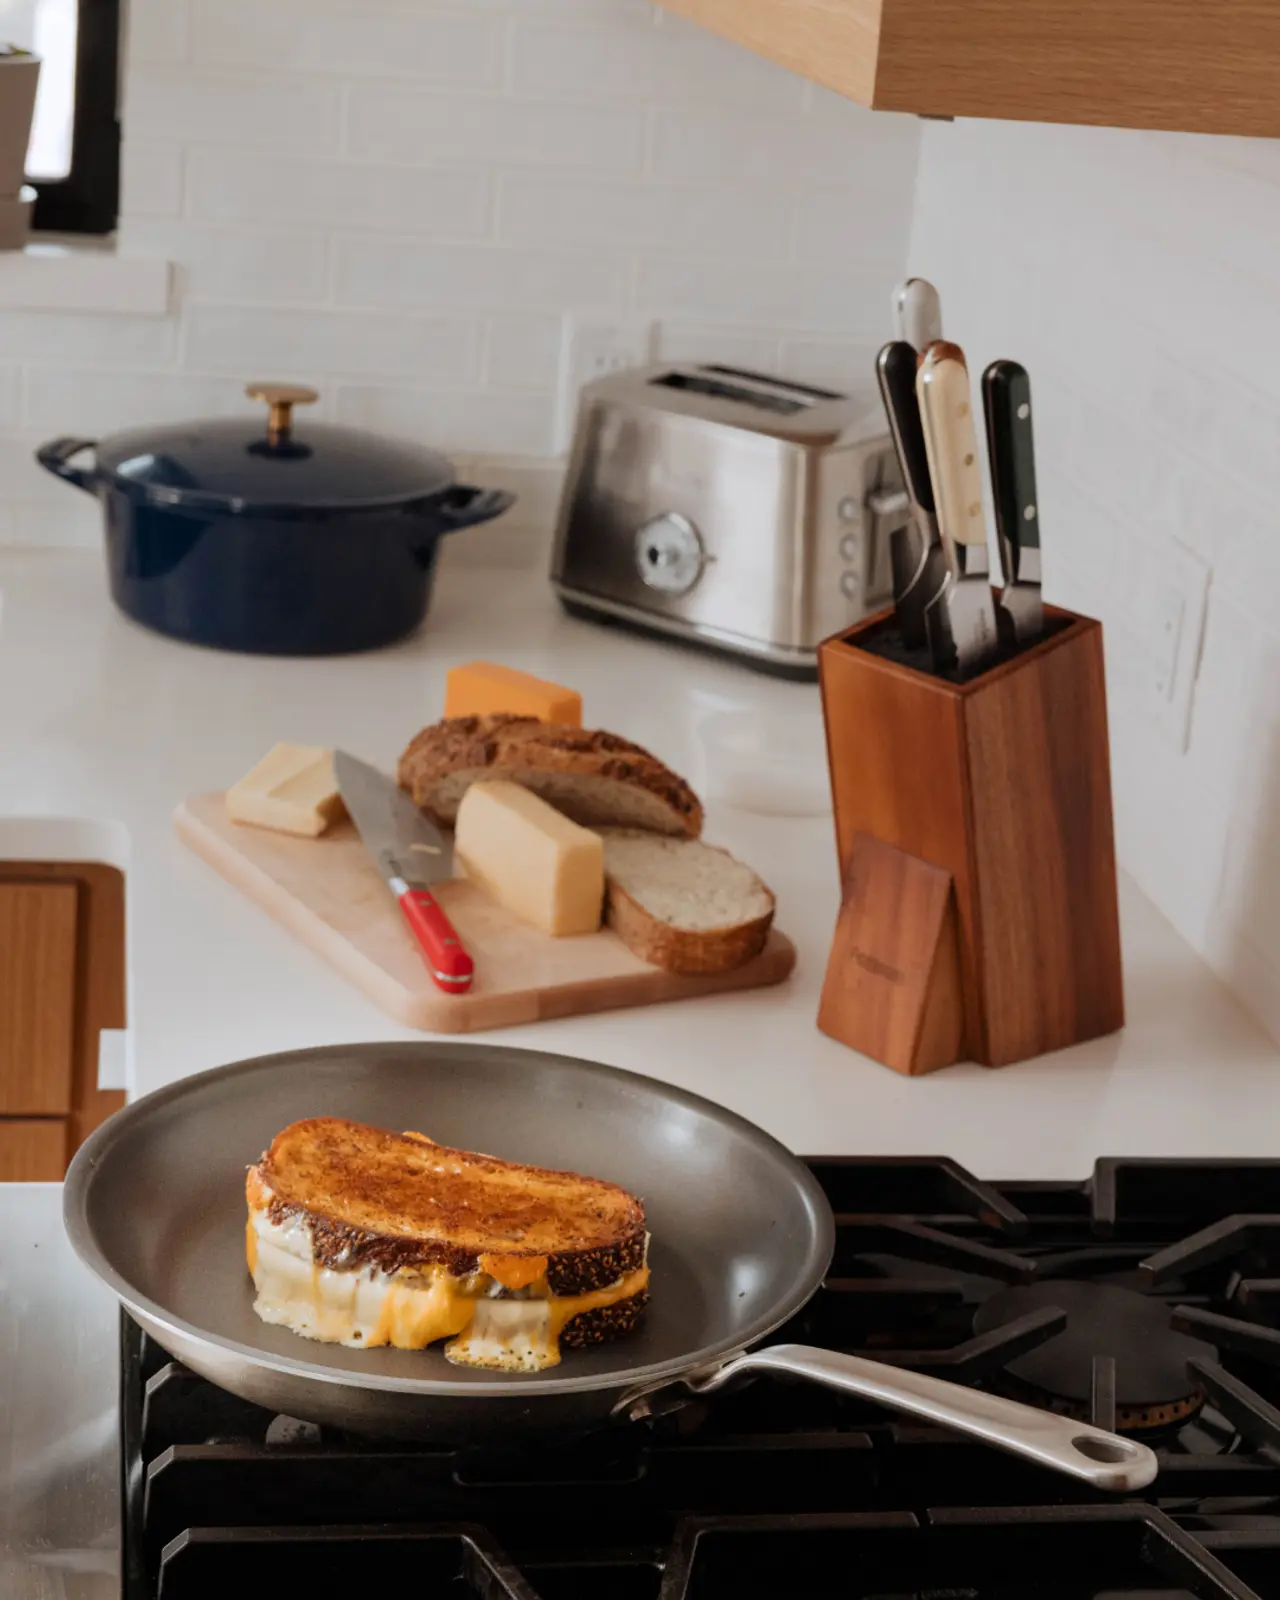 A grilled cheese sandwich is cooking in a pan on a stove, surrounded by kitchen appliances and various types of cheese on a cutting board.